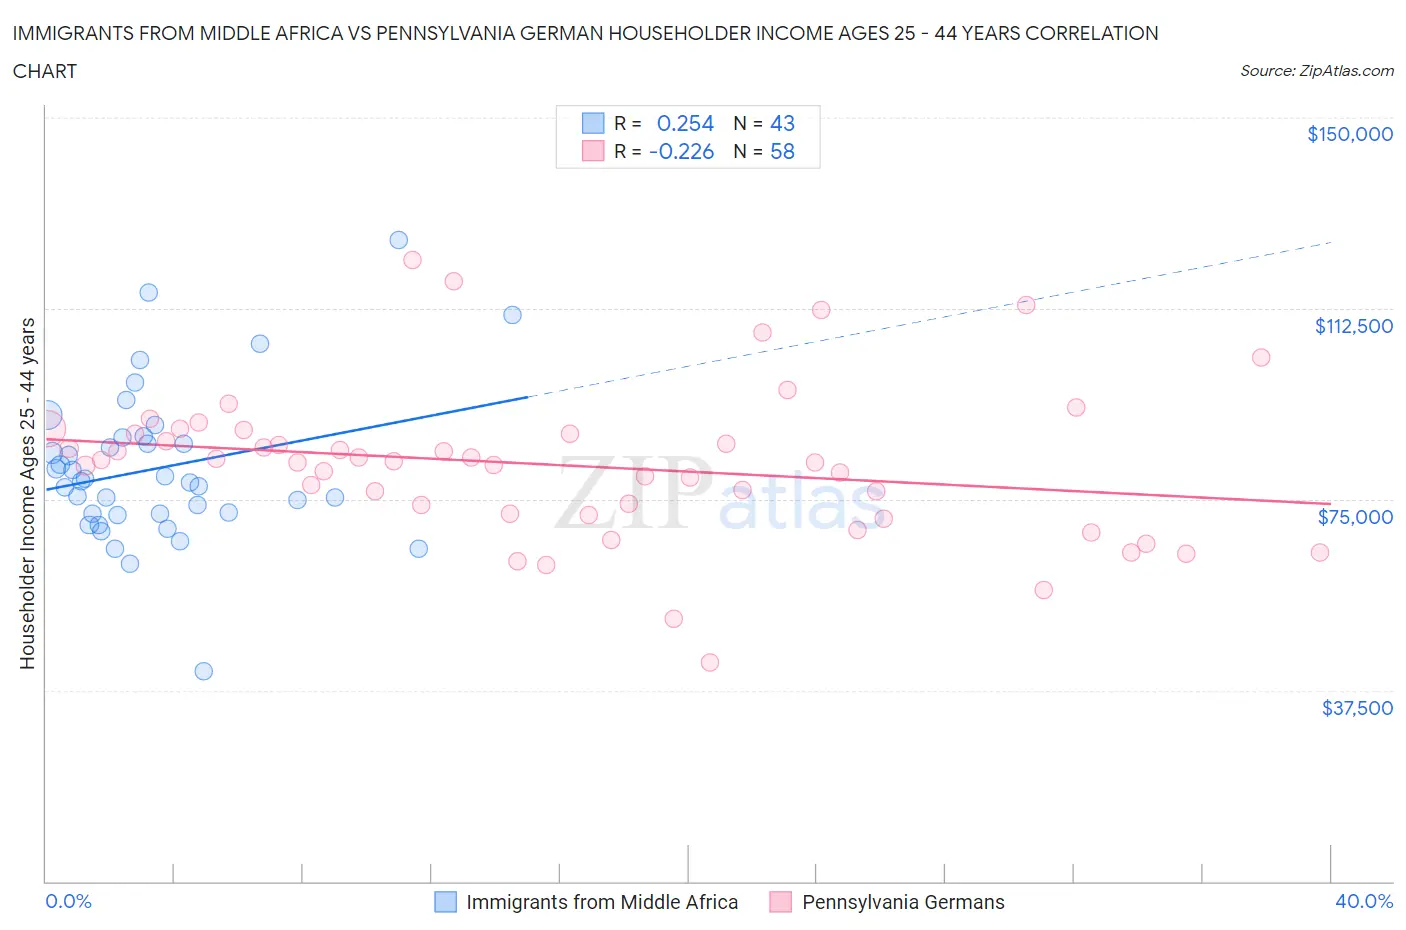 Immigrants from Middle Africa vs Pennsylvania German Householder Income Ages 25 - 44 years